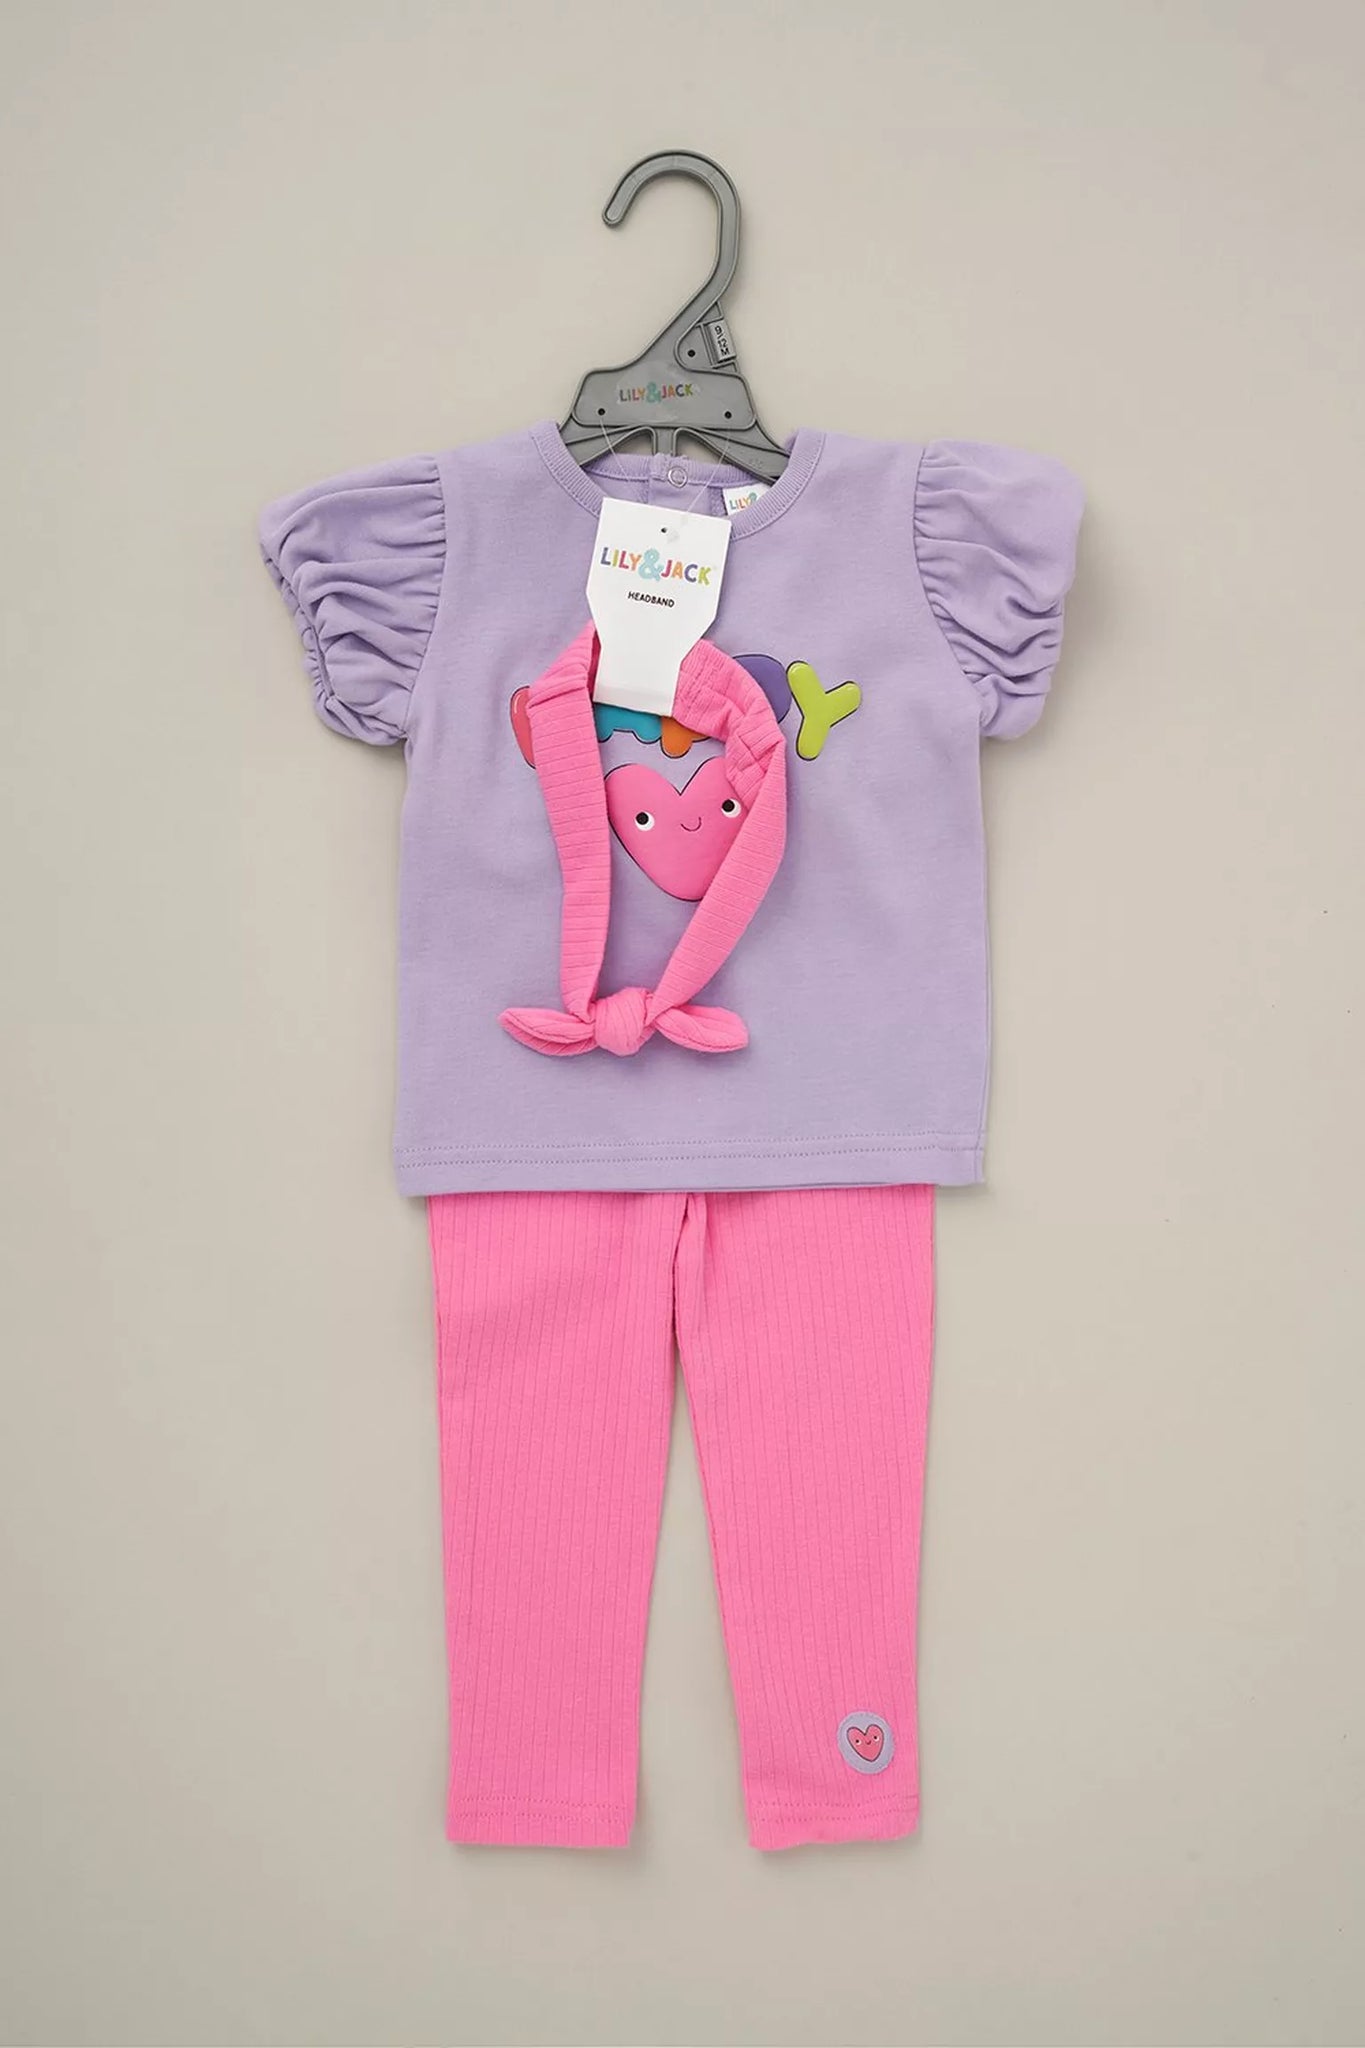 Lily & Jack Baby Girls Top, Ribbed Leggings & Headband Outfit D06814